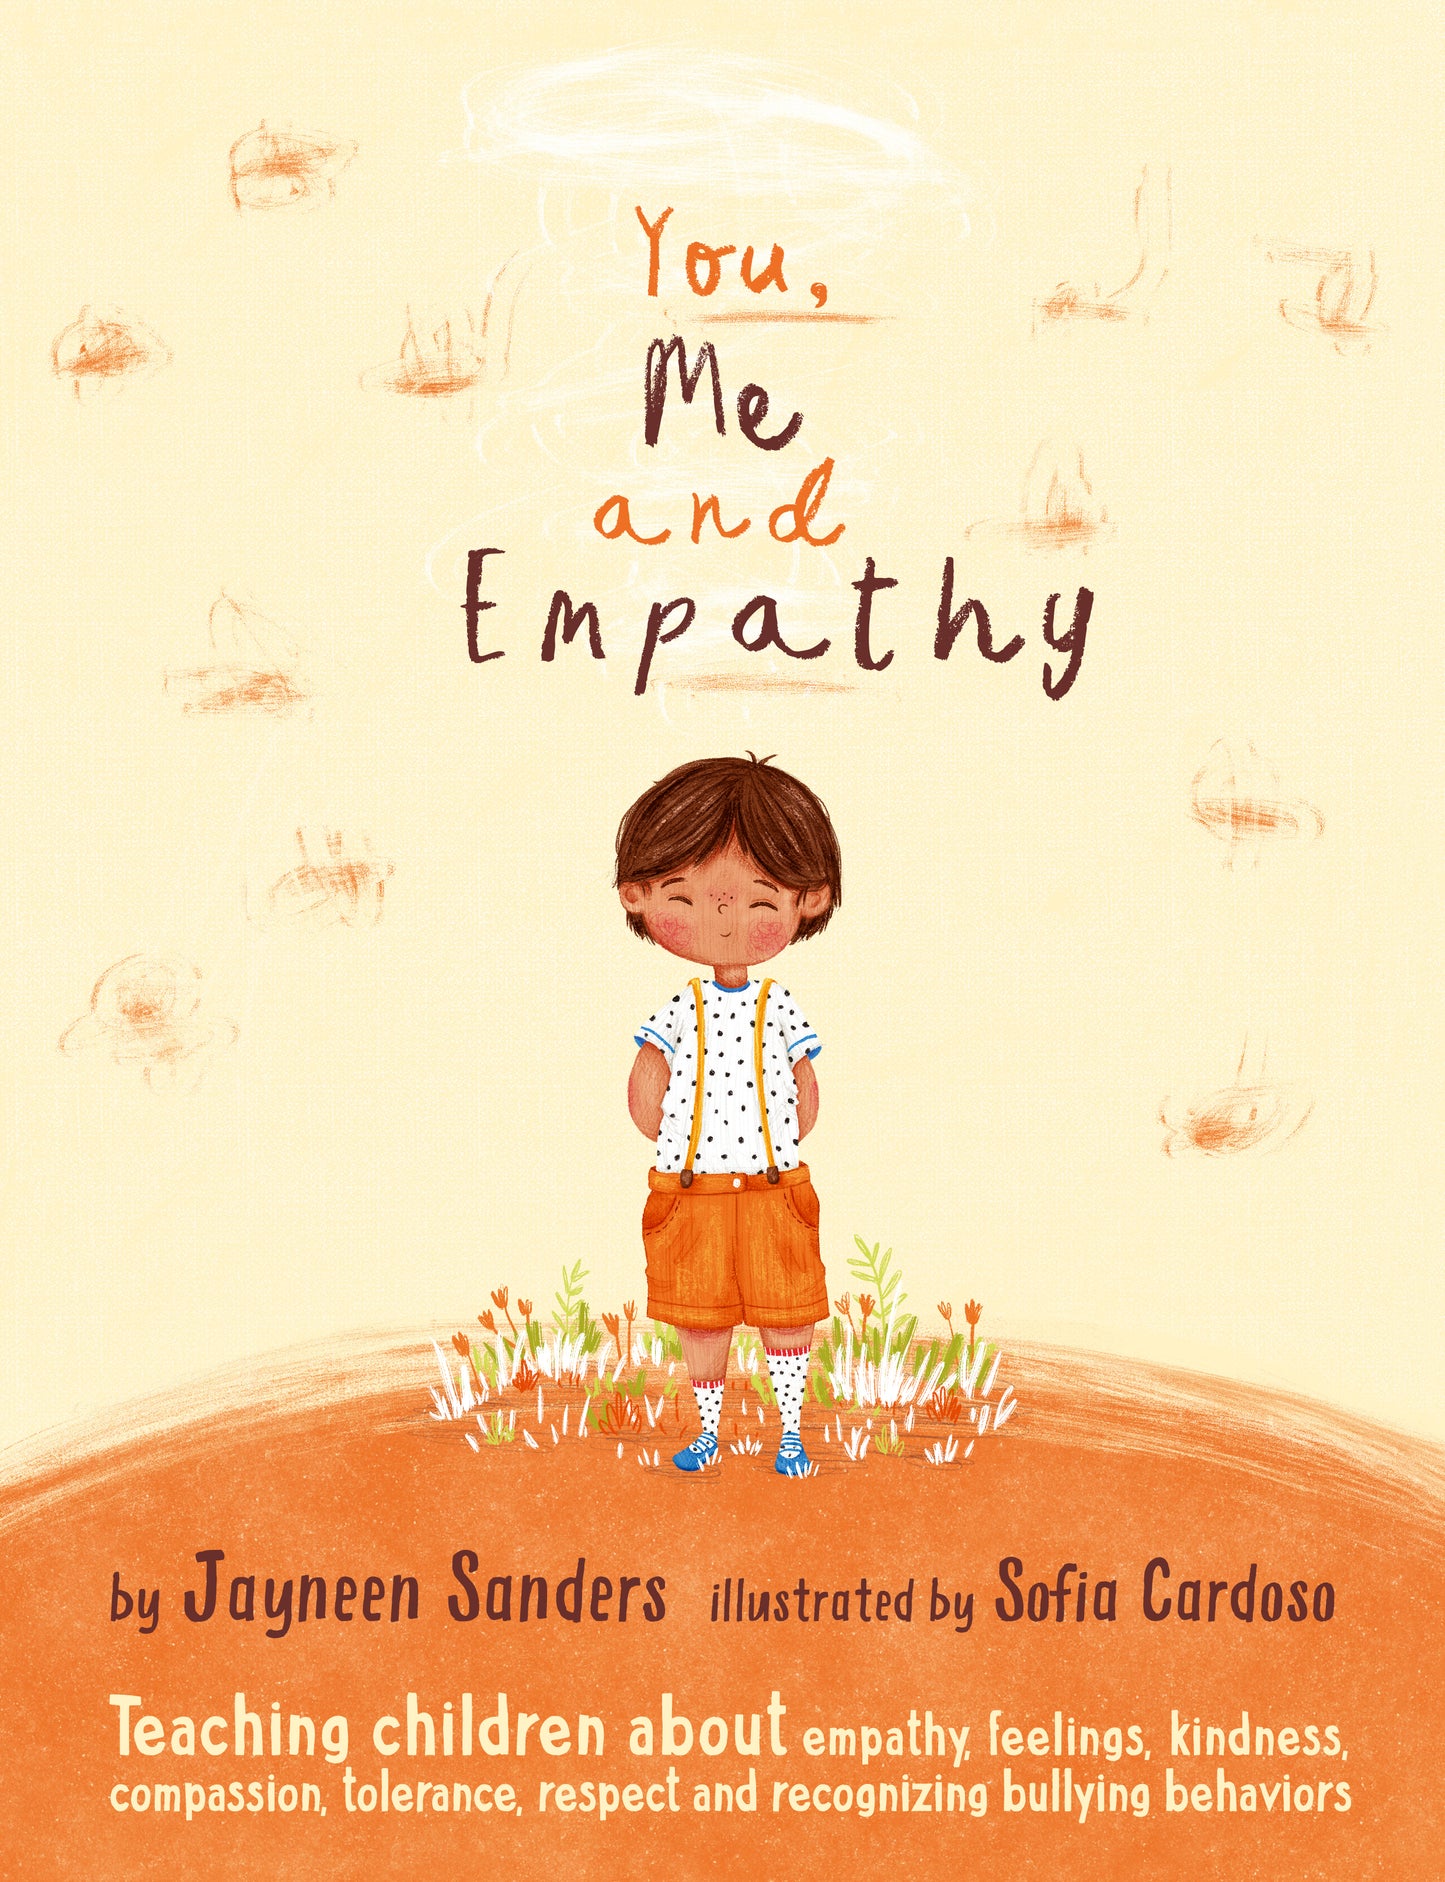 The cover of the book ‘You, Me and Empathy’ by Jayneen Sanders.